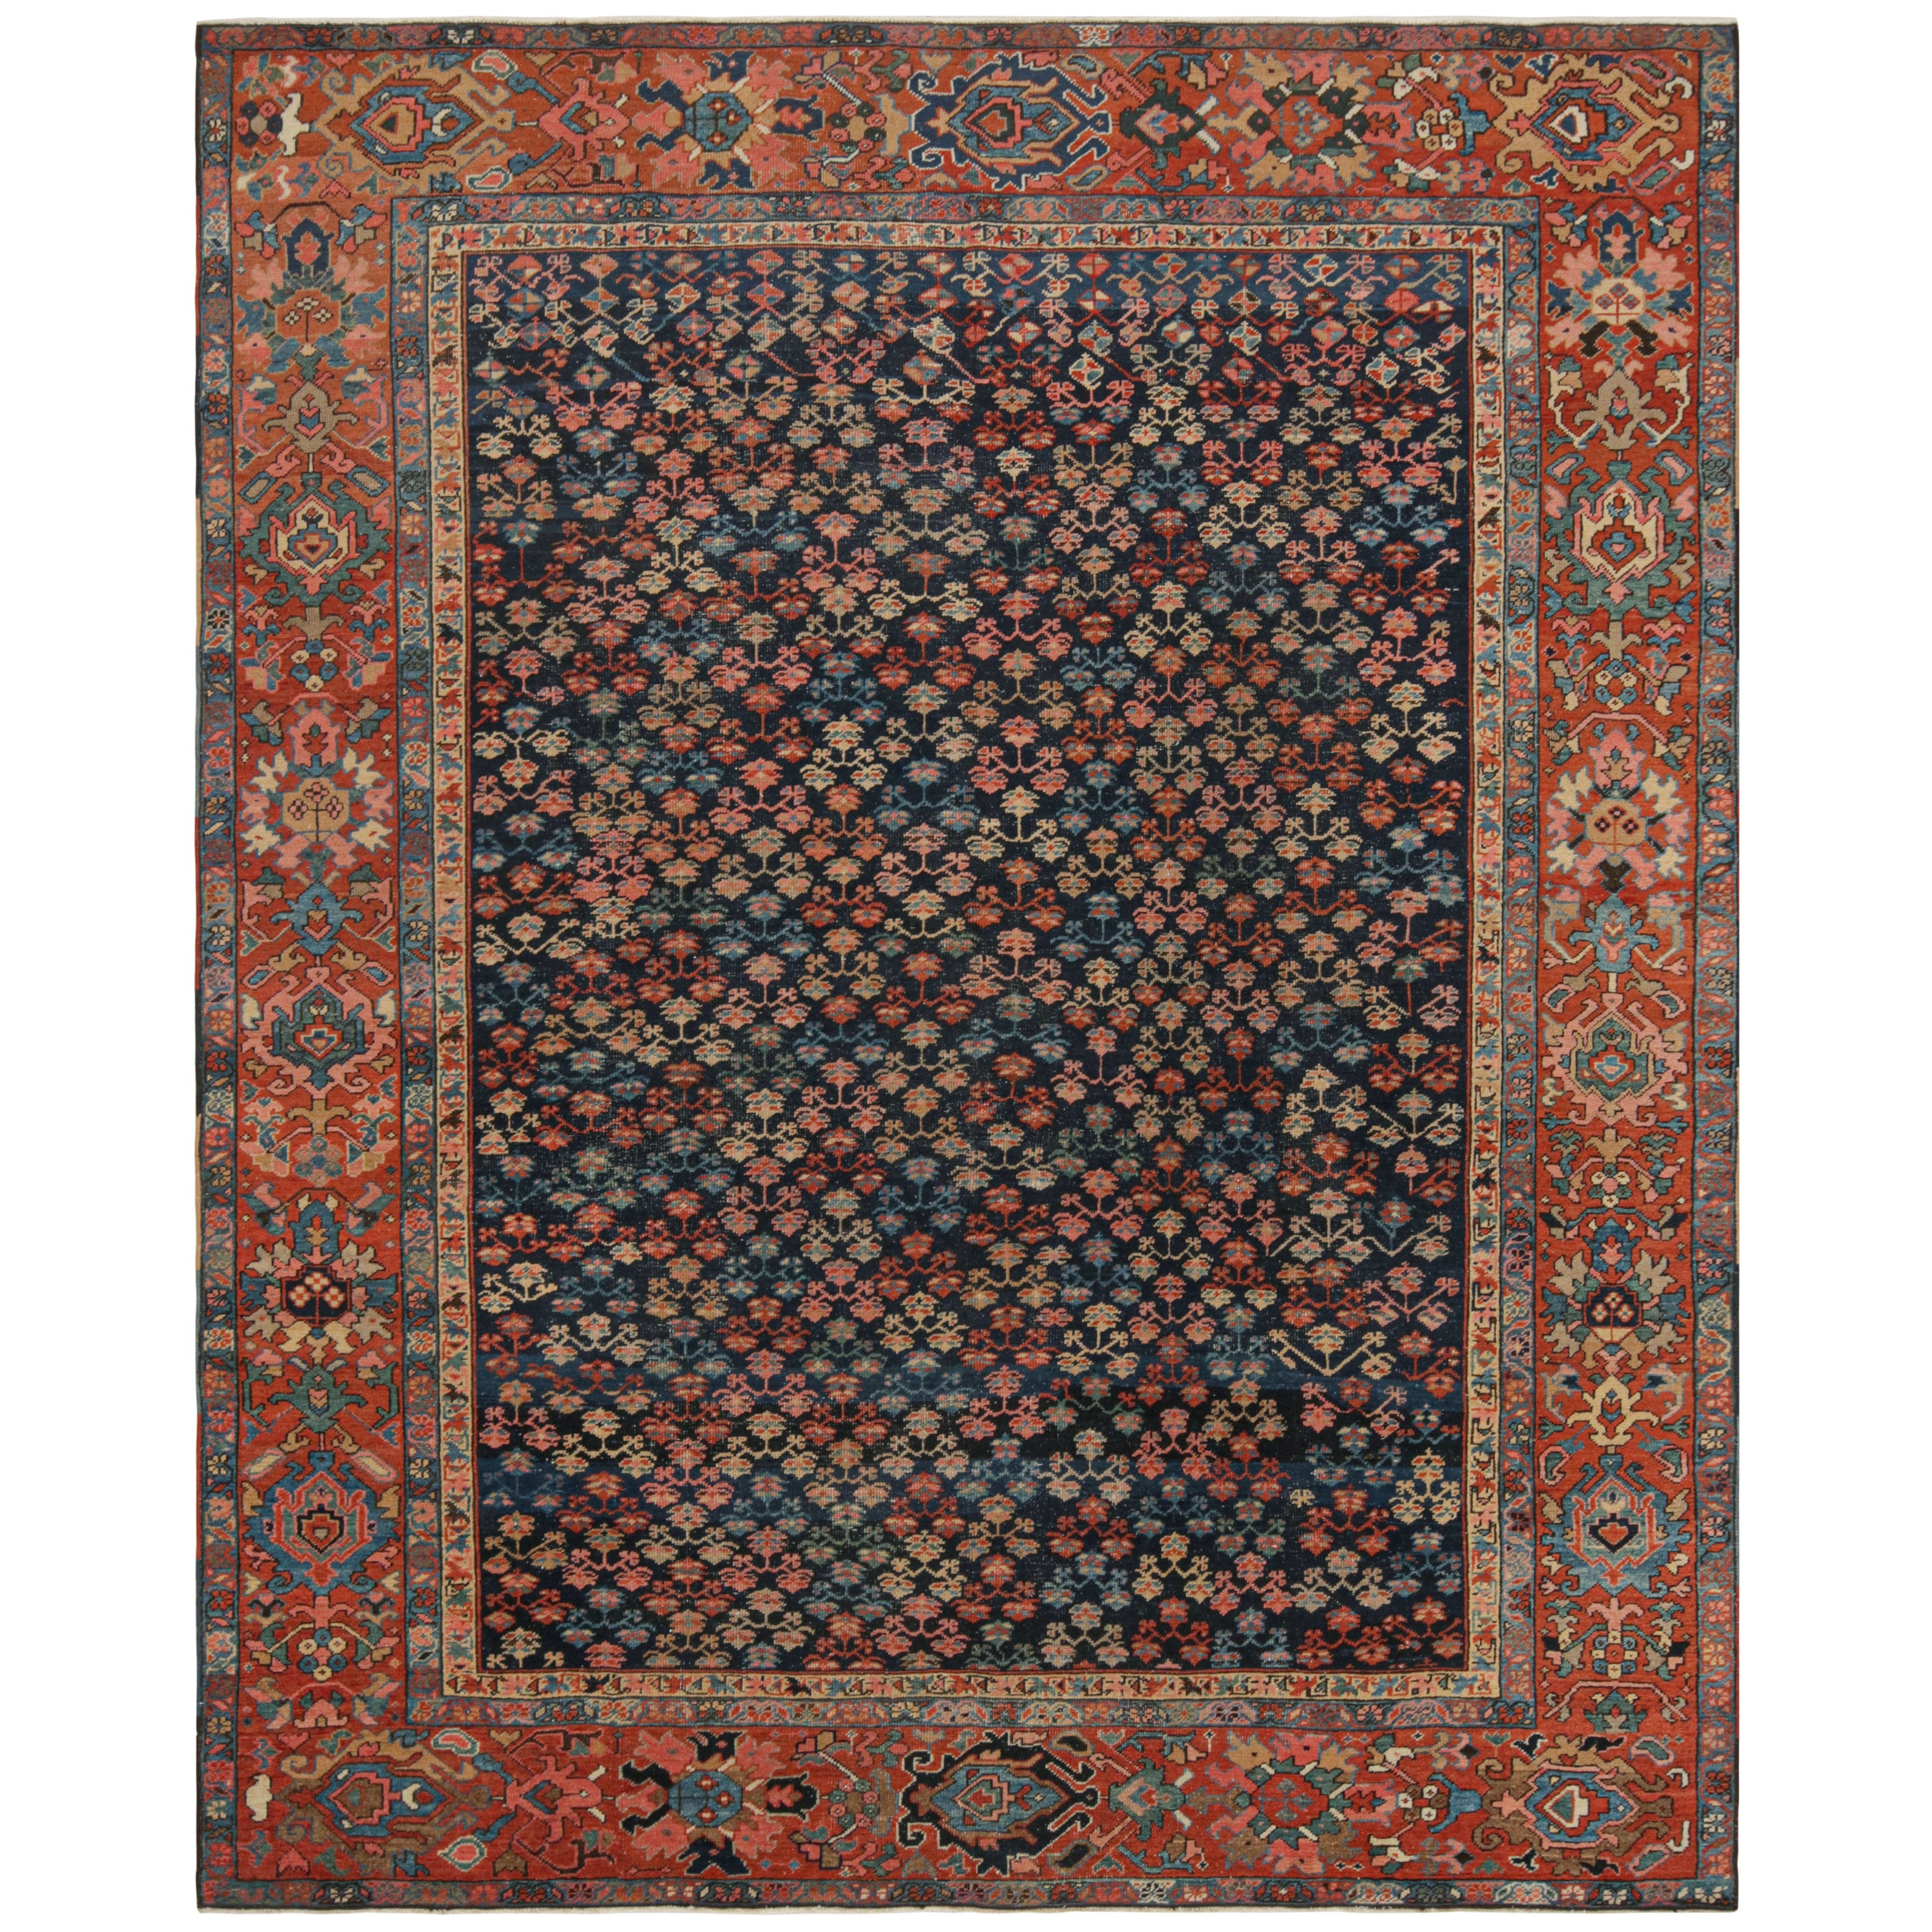 Antique Persian Bakshaish Rug in Navy Blue with Floral Patterns from Rug & Kilim